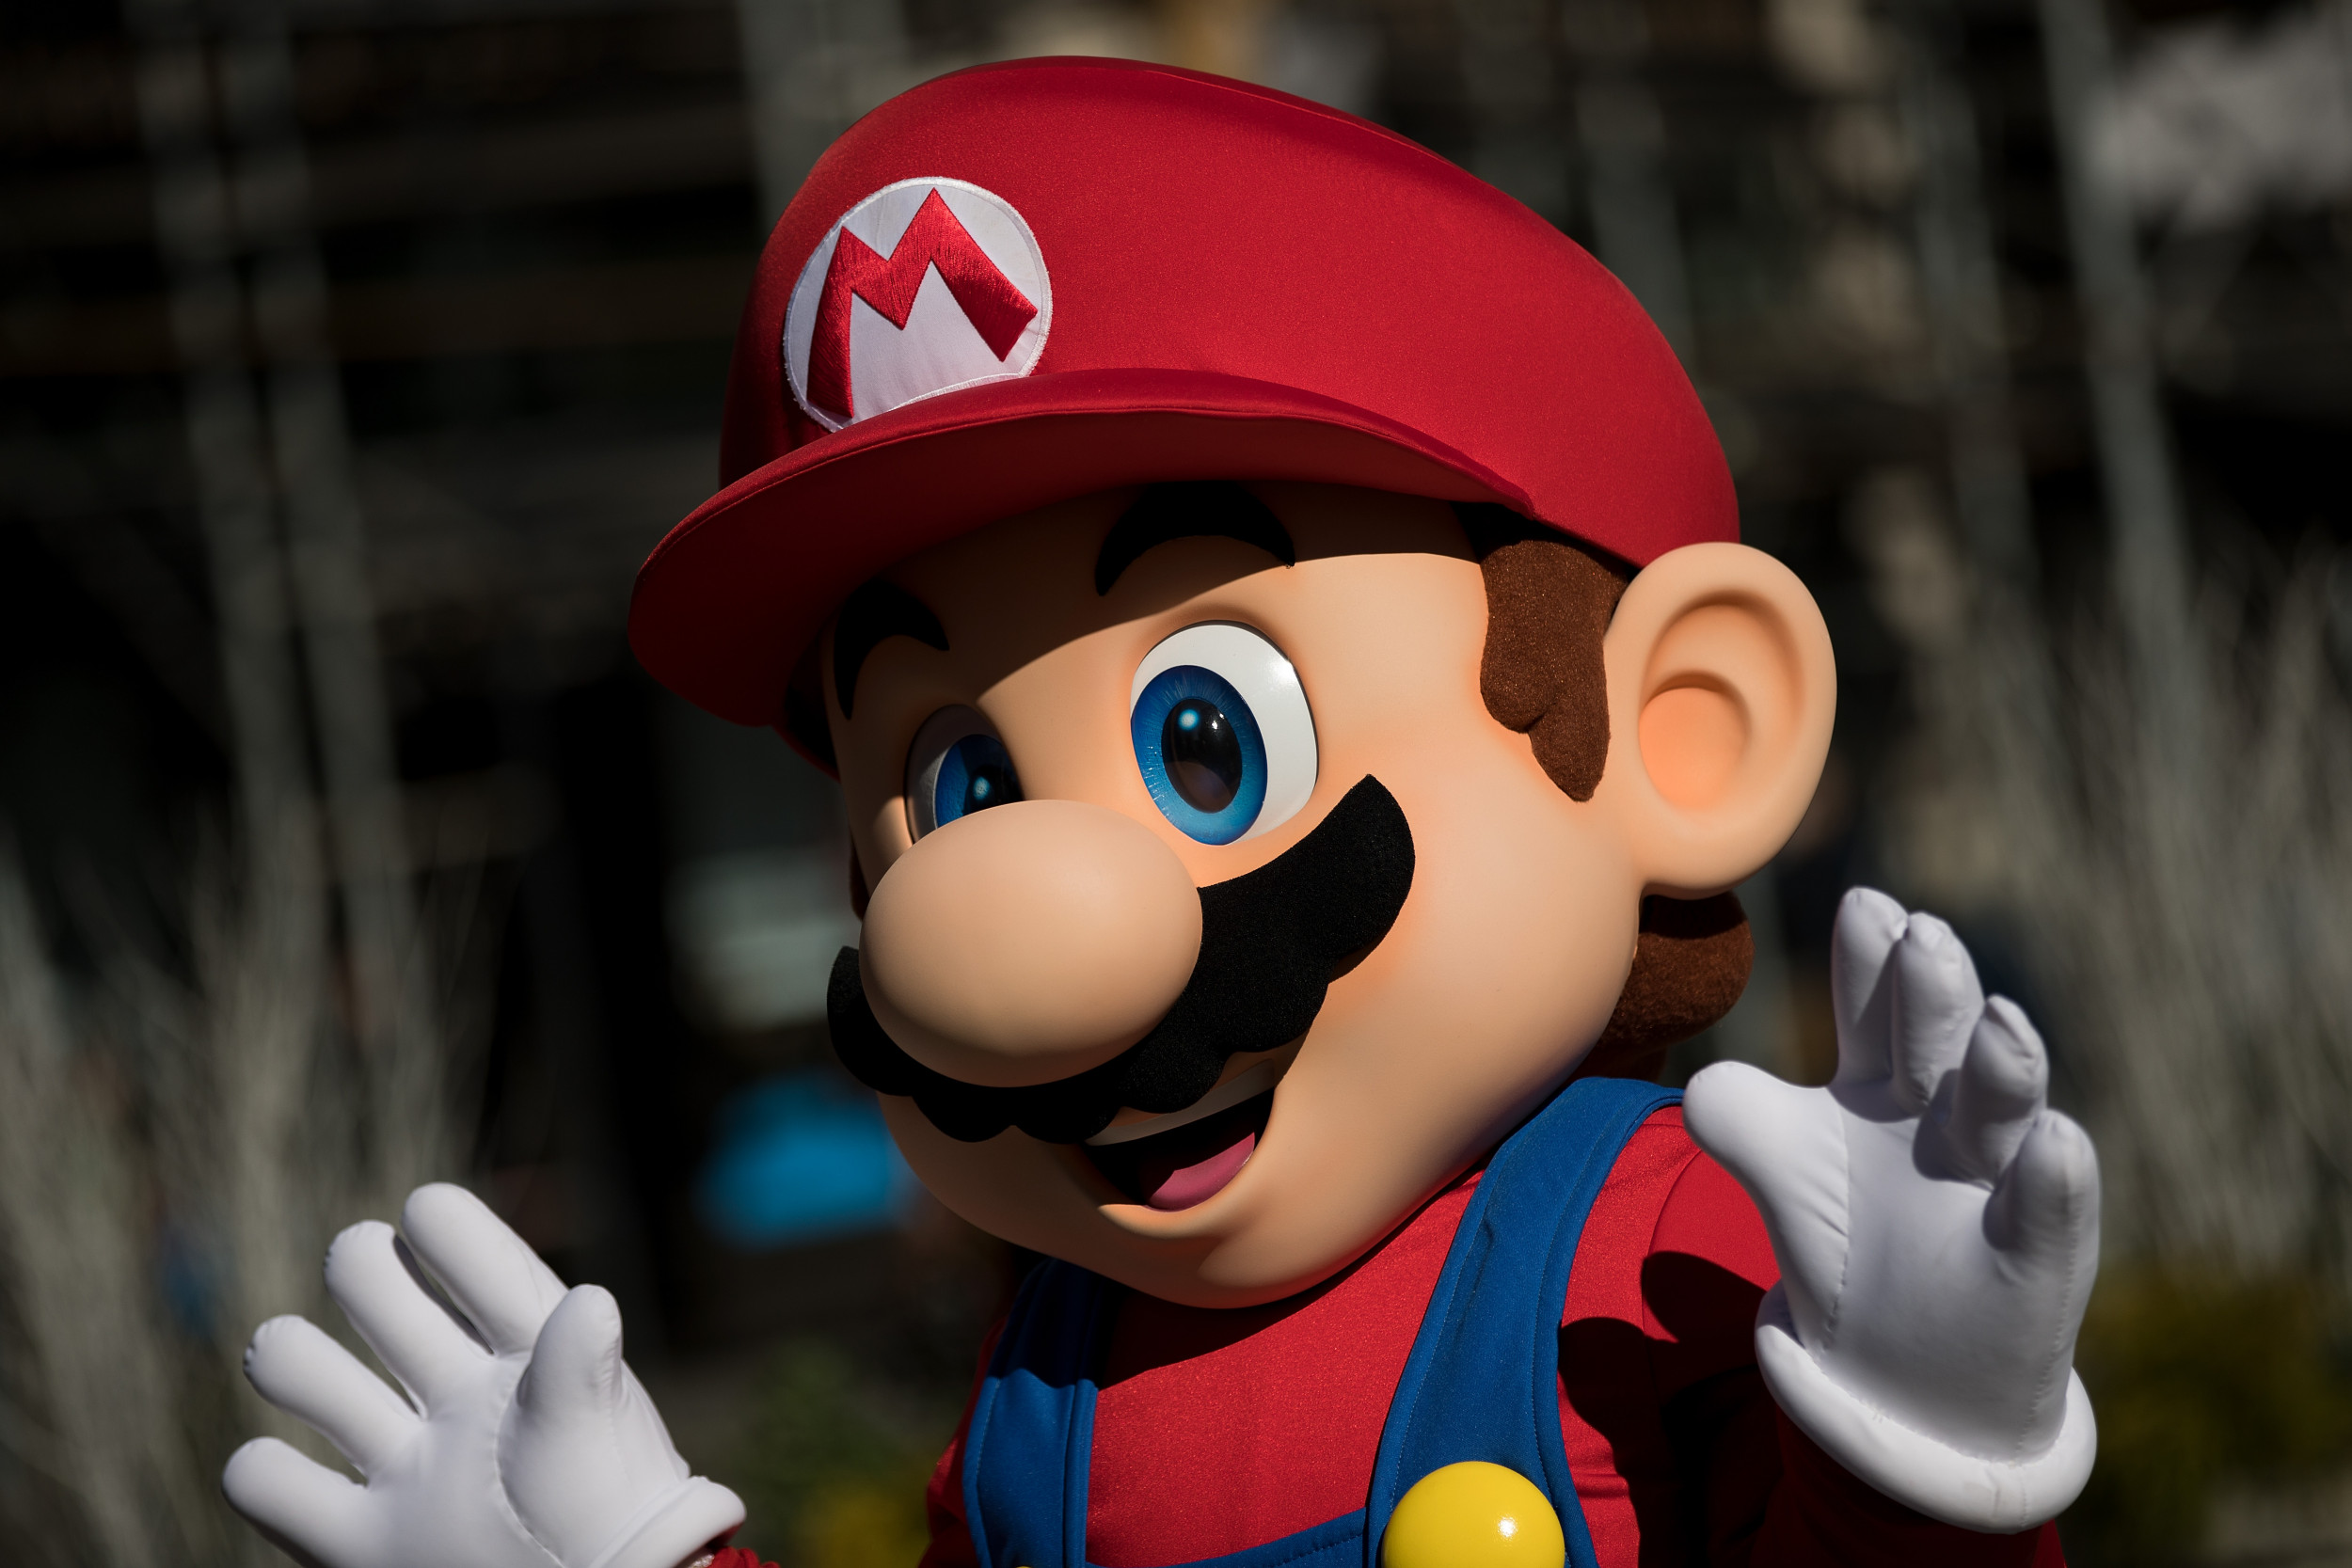 mario games for free on the rest